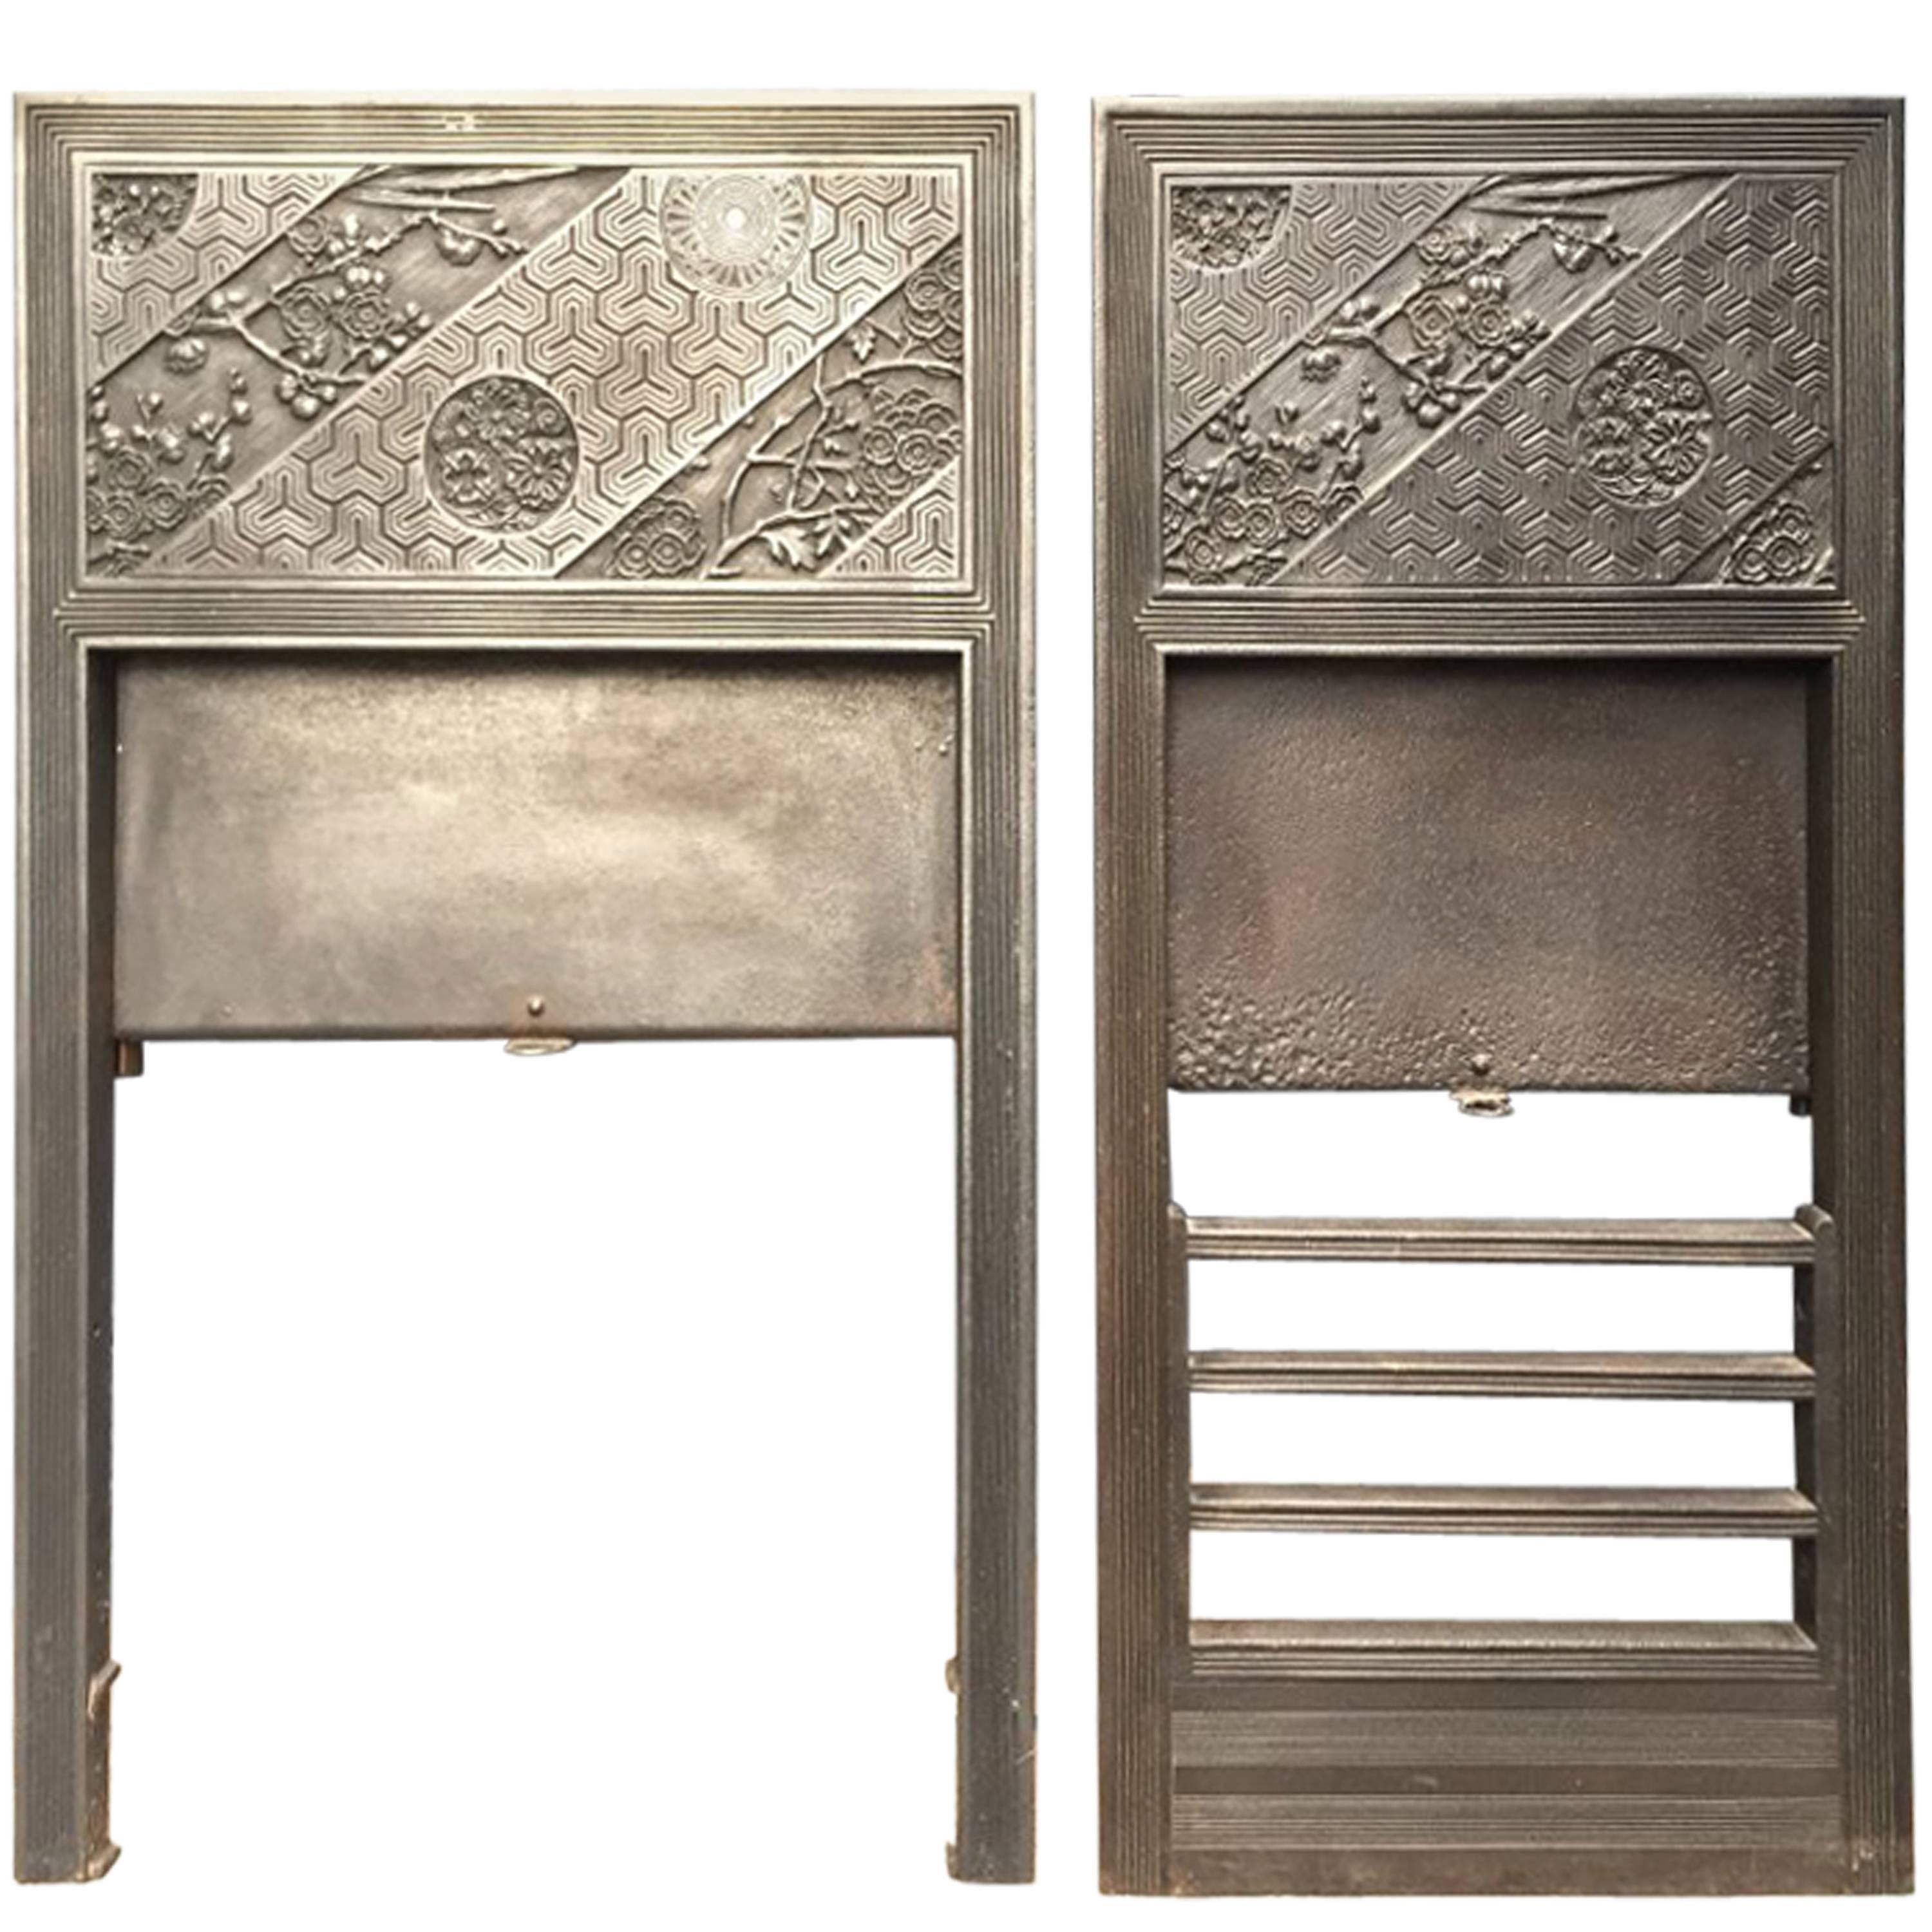 Pair of Anglo-Japanese Cast Iron Fire Inserts by T Jeckyll For Sale